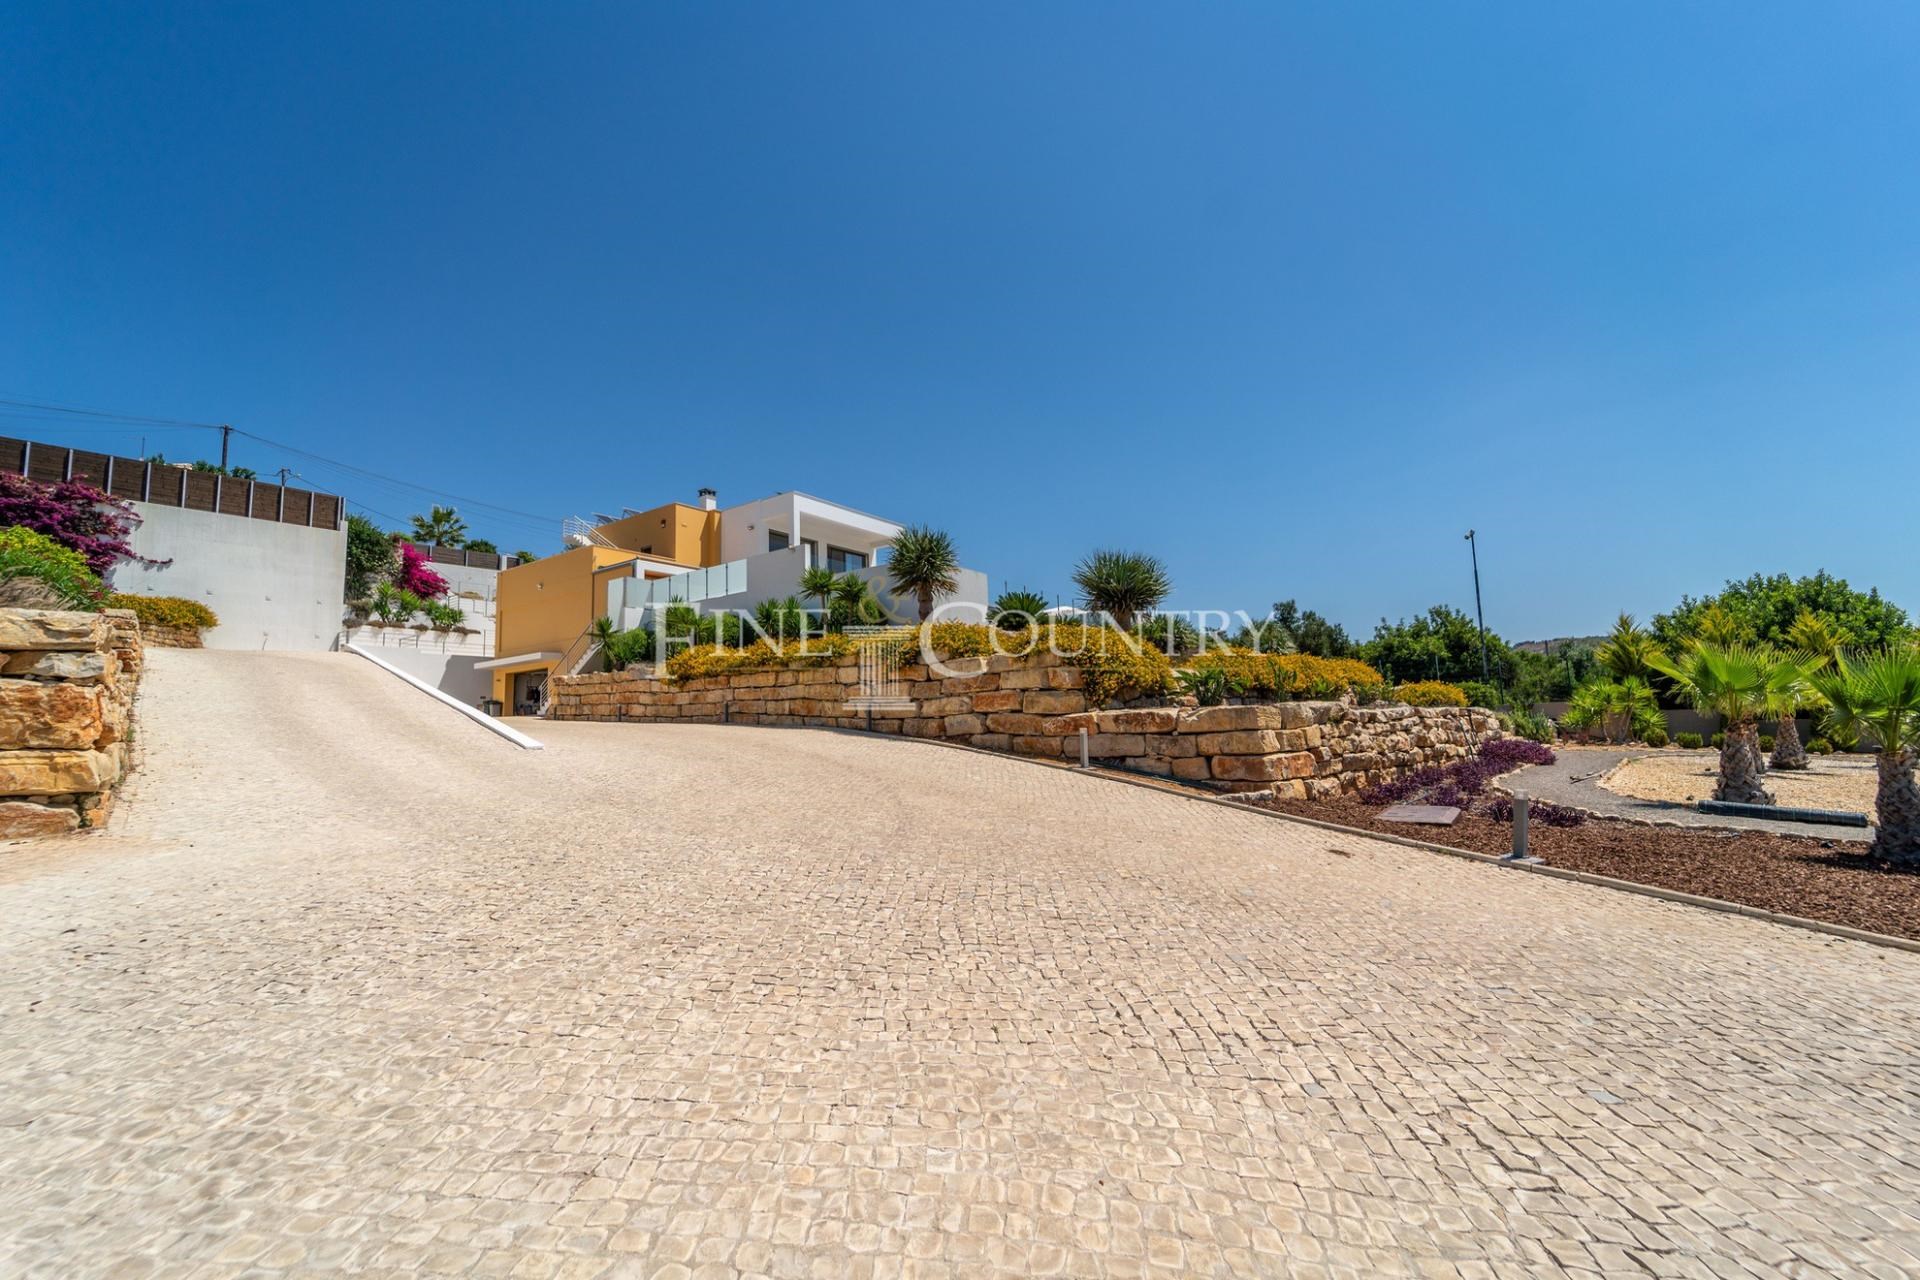 Photo of Loulé - Outstanding 5(+2)-Bedroom Villa with pool in São Clemente